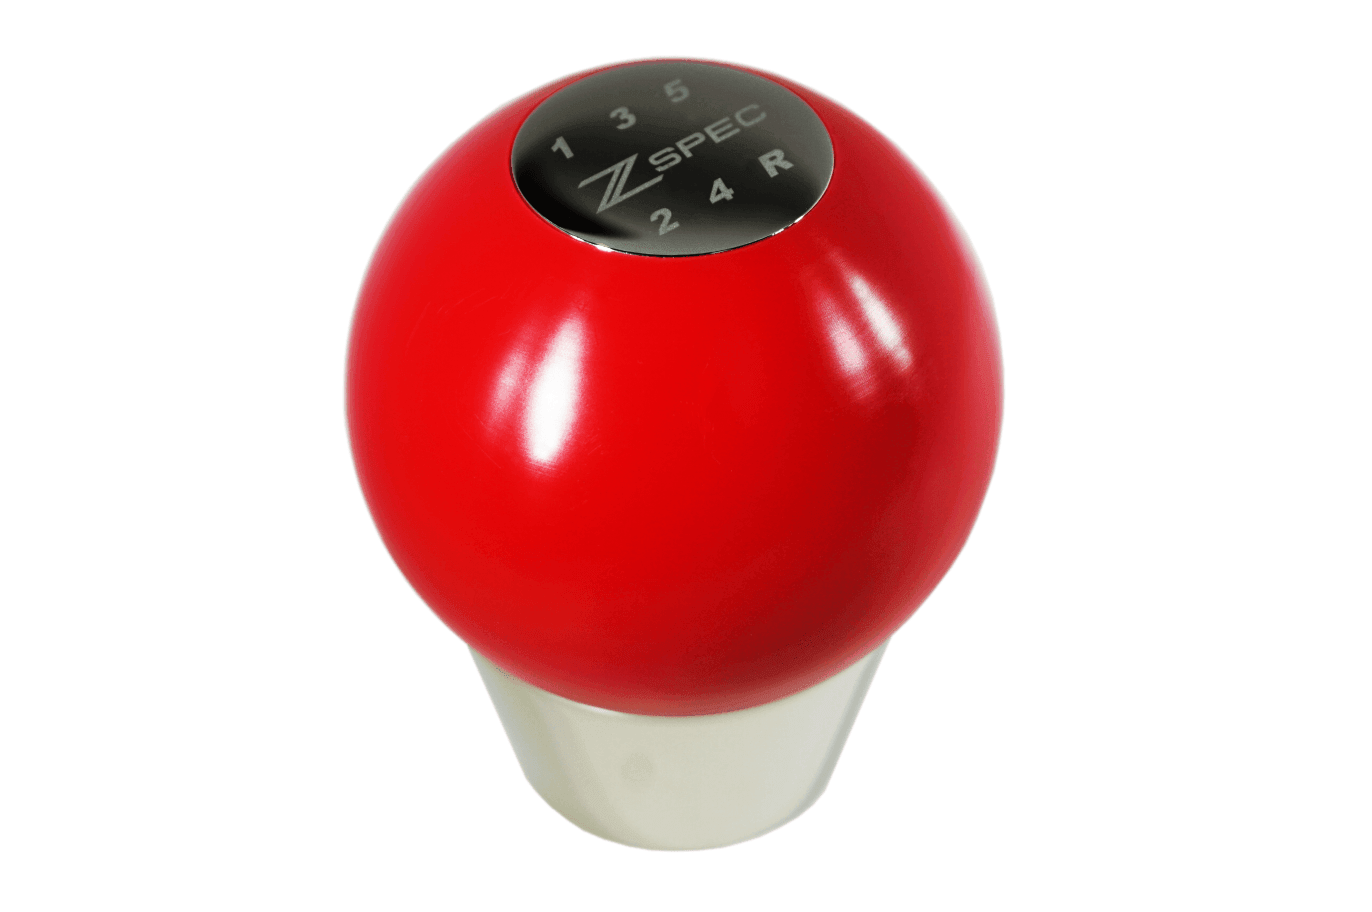 ZSPEC Shift Knob M12-1.25, Delrin & Stainless, 5-Speed Shift Pattern Coin  Interior Performance Upgrade Accessory Dress Up Bolts Fasteners Hardware Matters SUS304 Black Red Blue White Car Auto Vehicle-1.25, Delrin & Stainless, 5-Speed Shift Pattern Coin Nissan NISMO 300zx